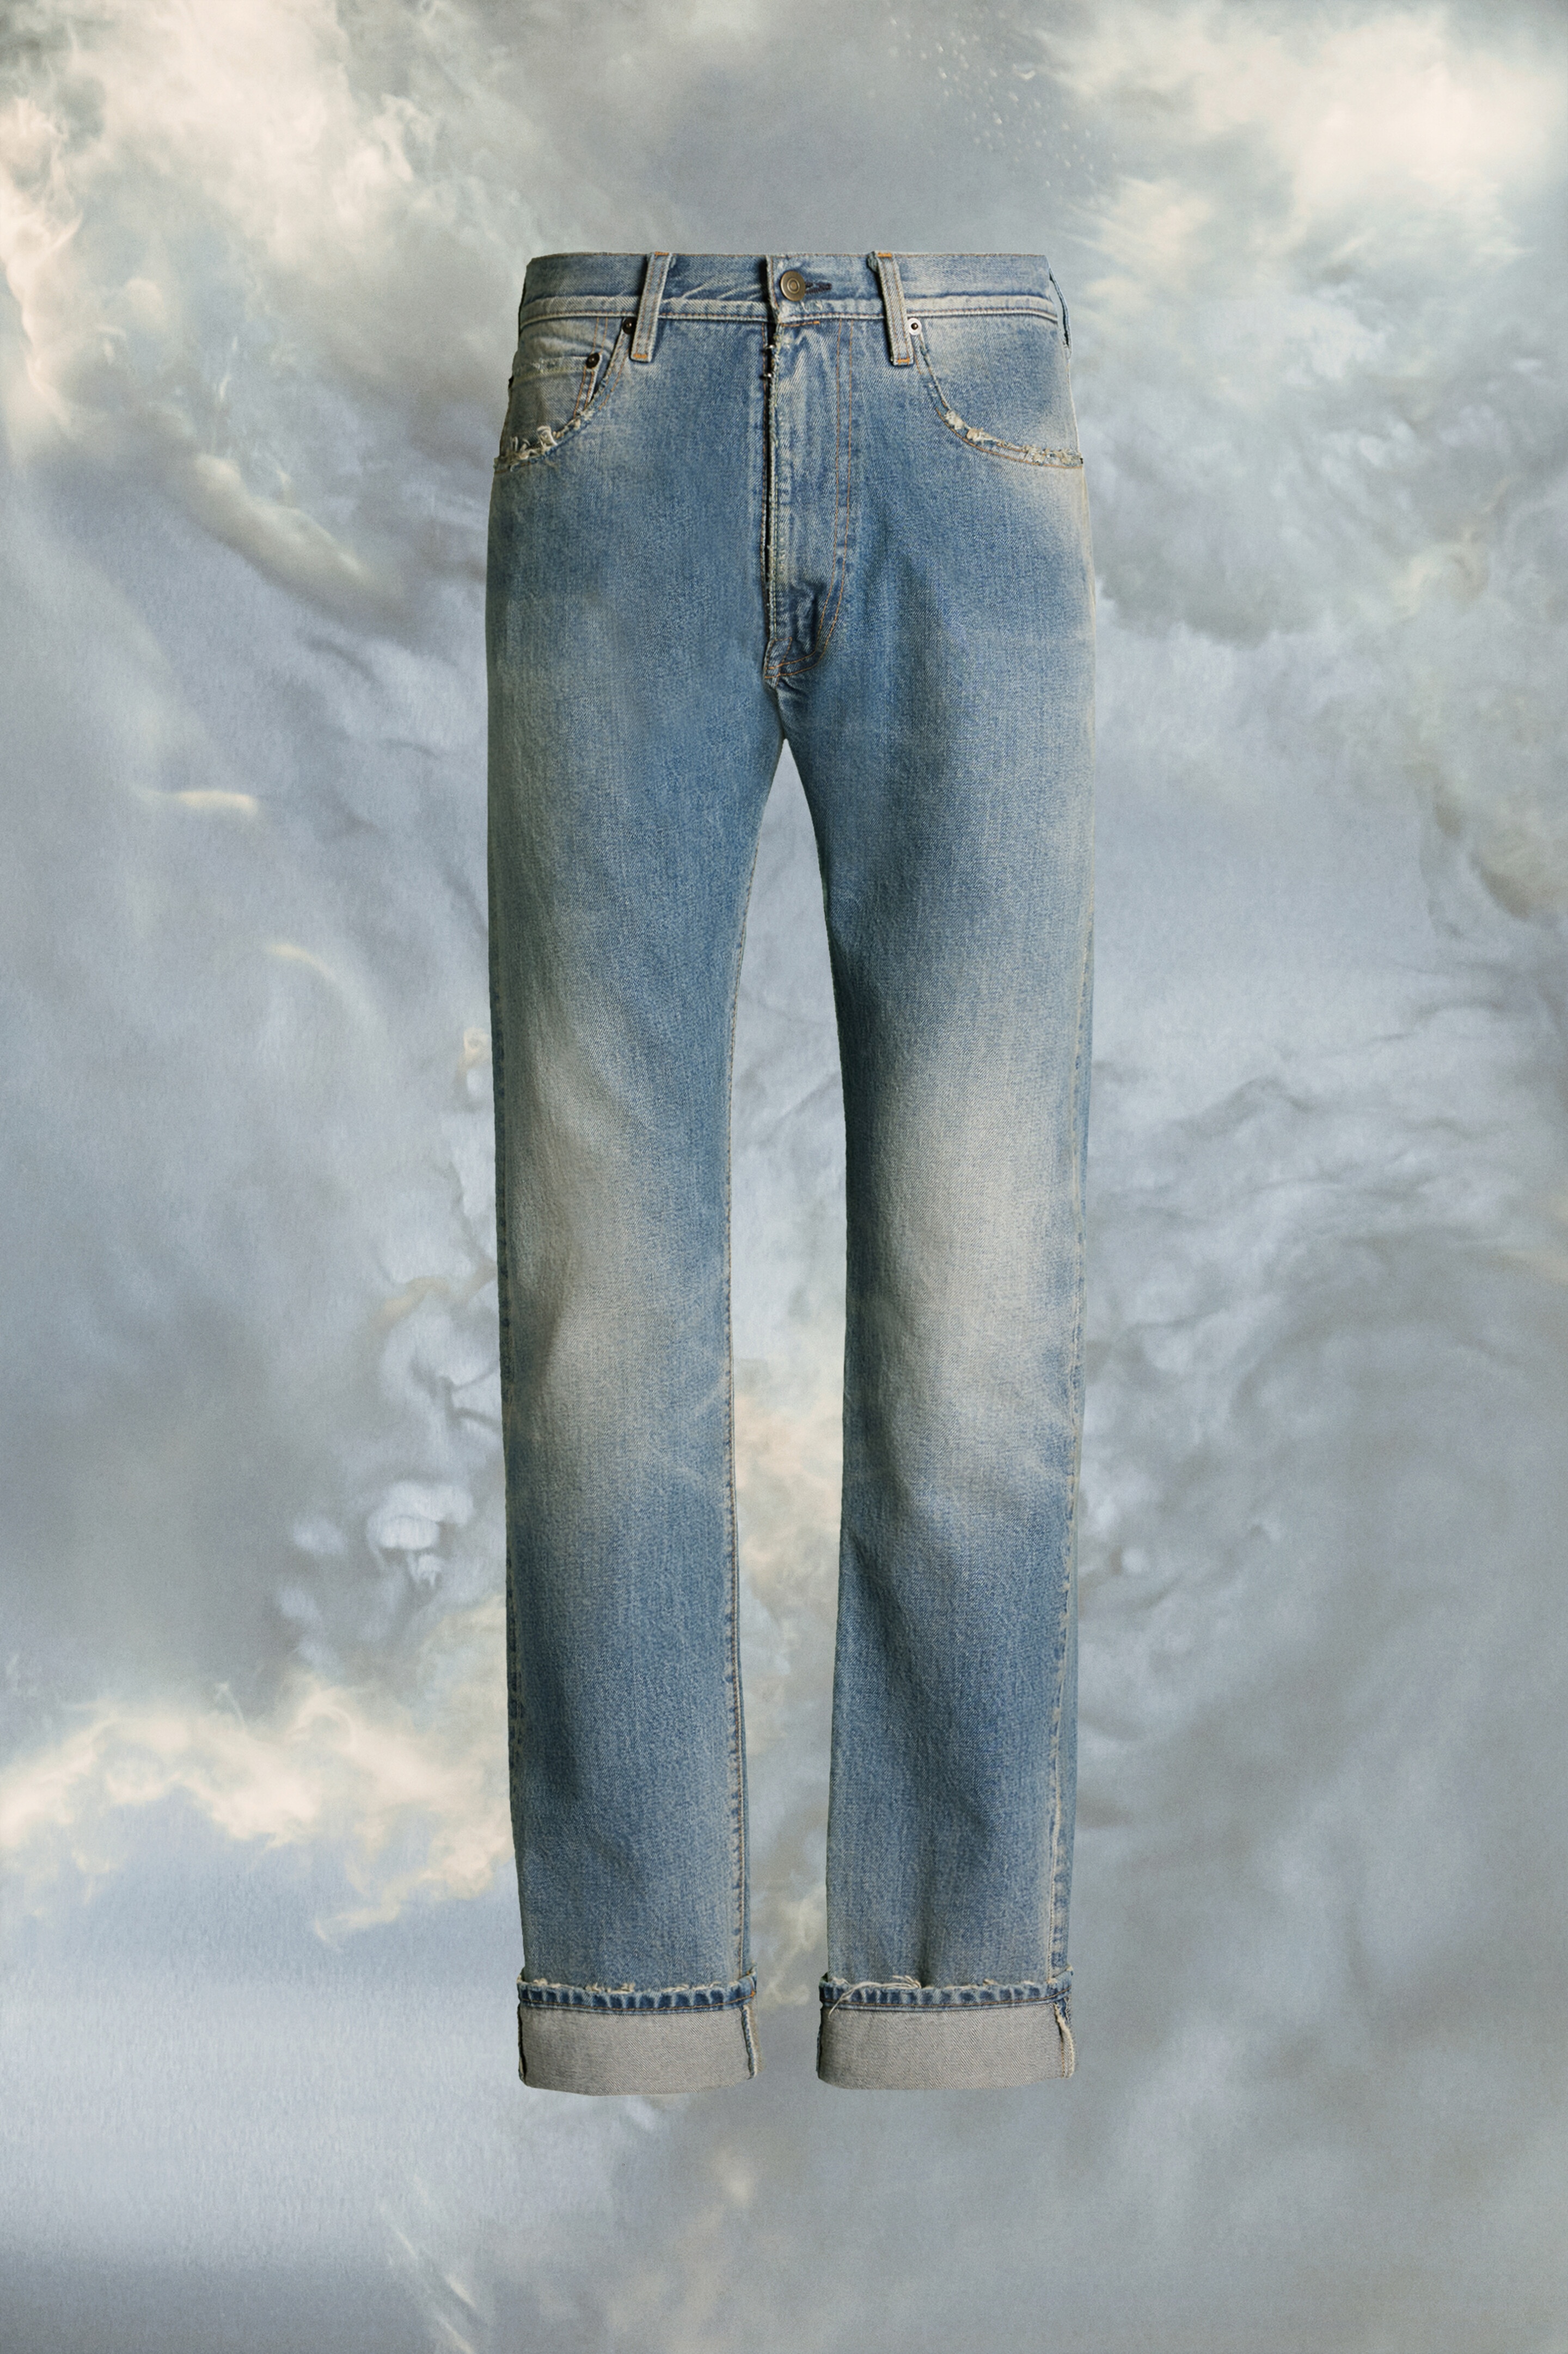 Distressed jeans - 1